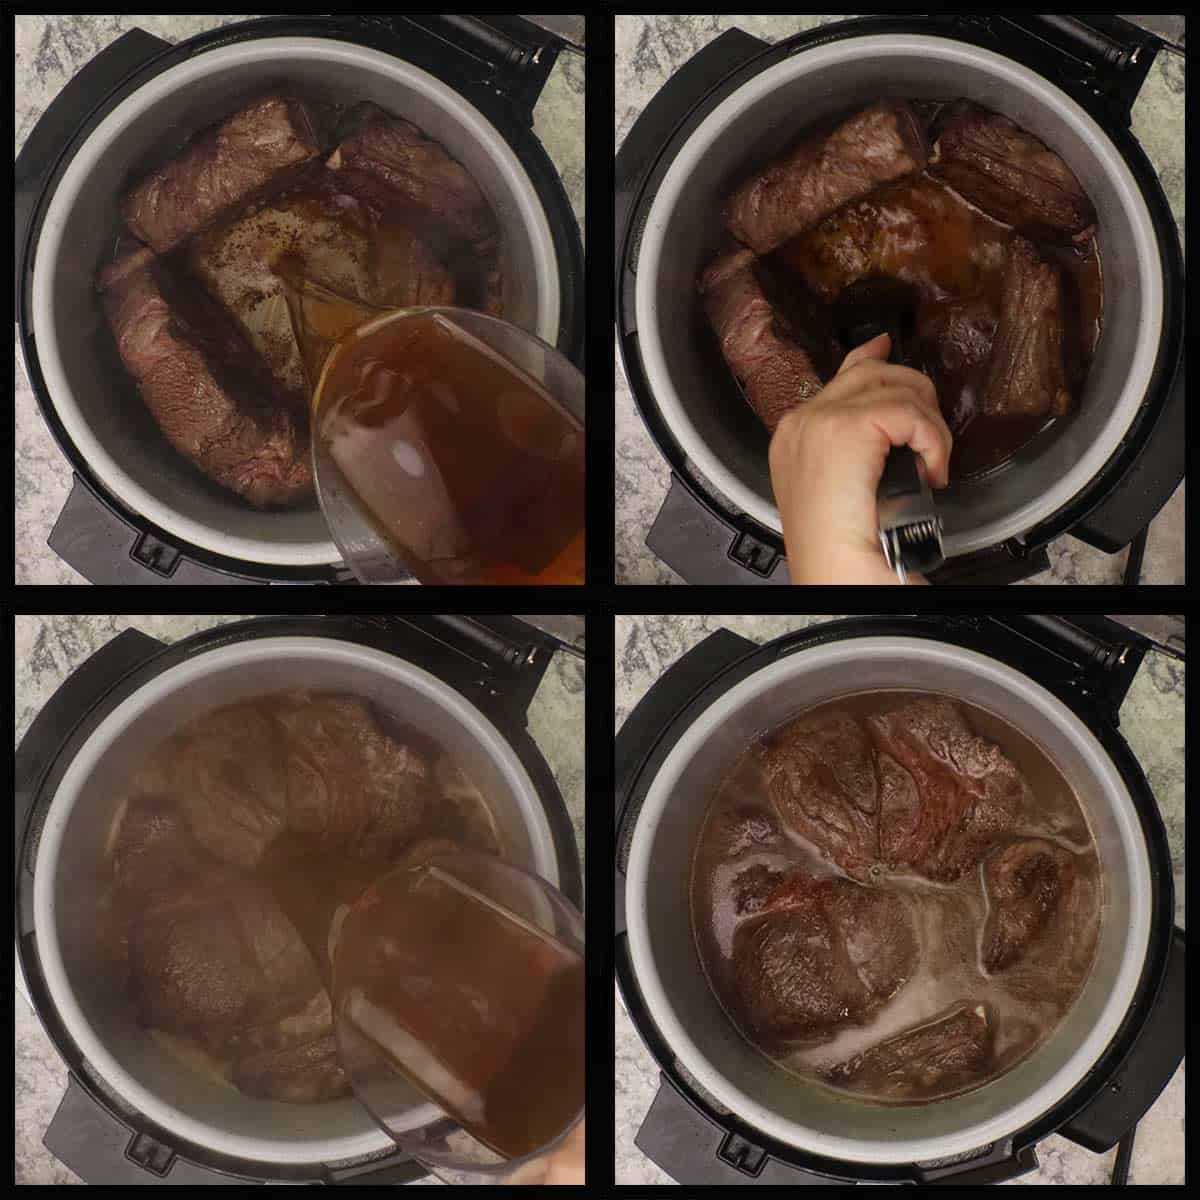 deglazing the pot after searing birria meat.